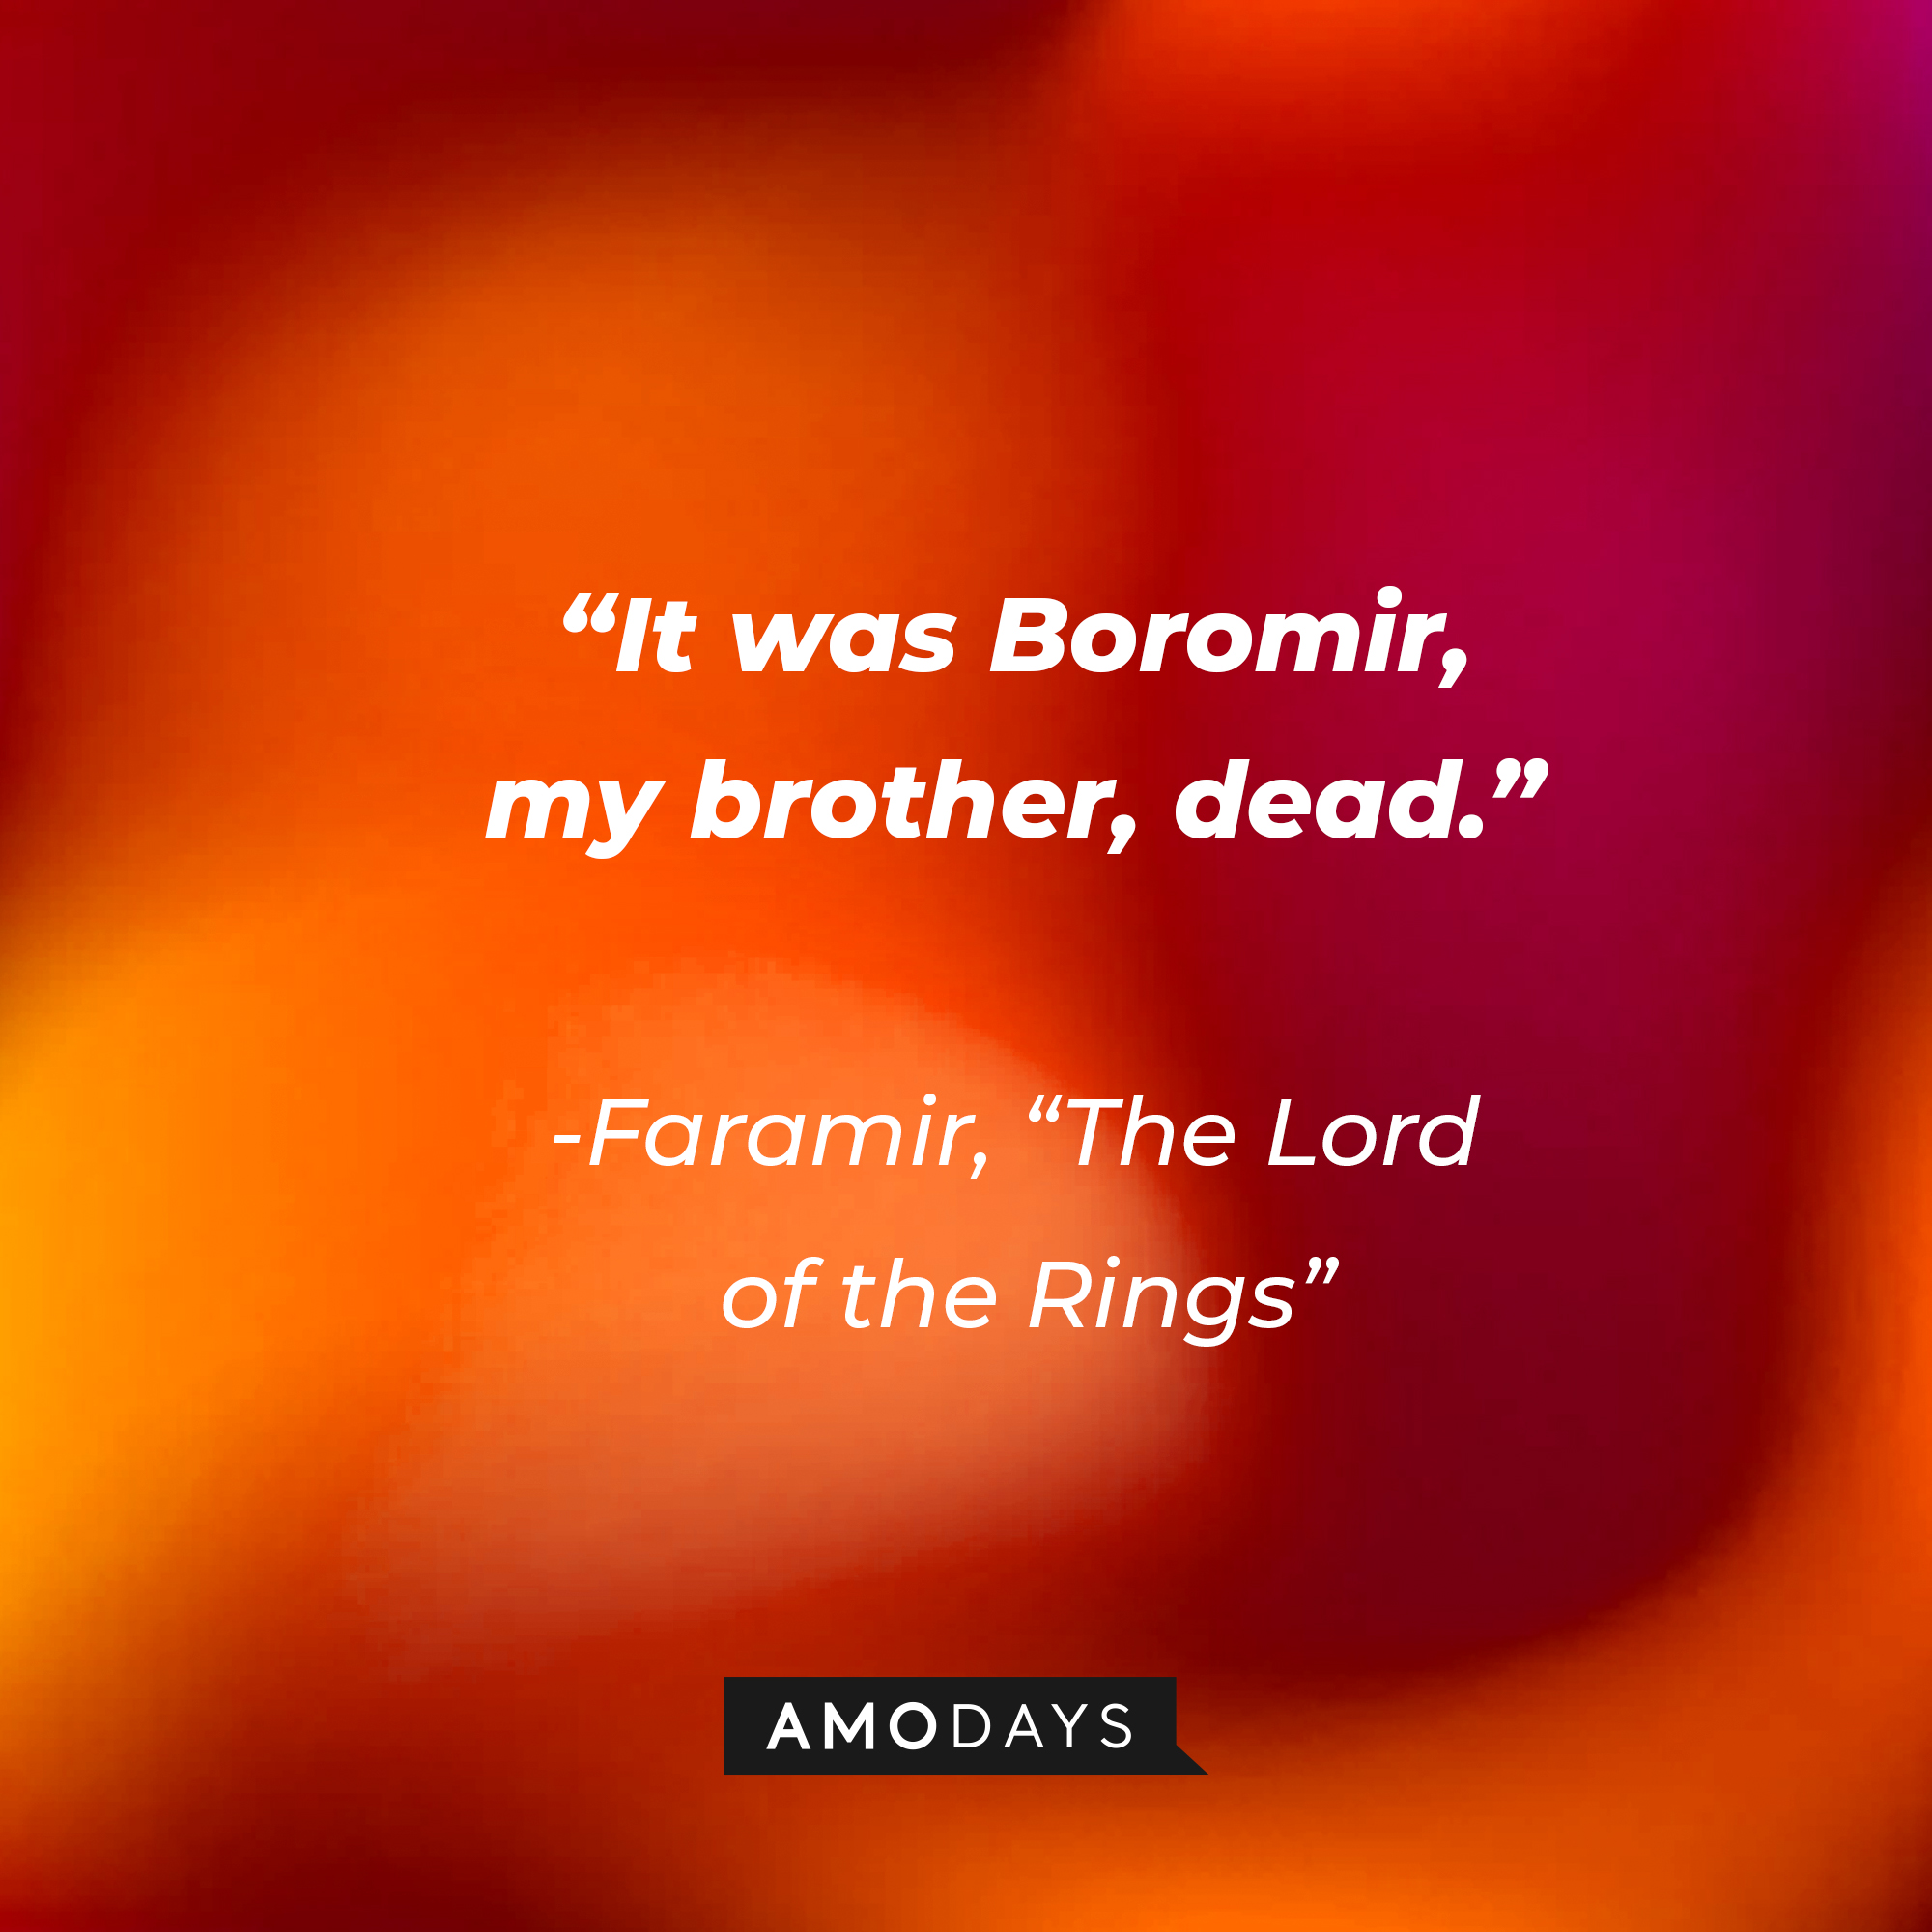 Faramir's quote from "The Lord of the Rings": "It was Boromir, my brother, dead." | Source: AmoDays